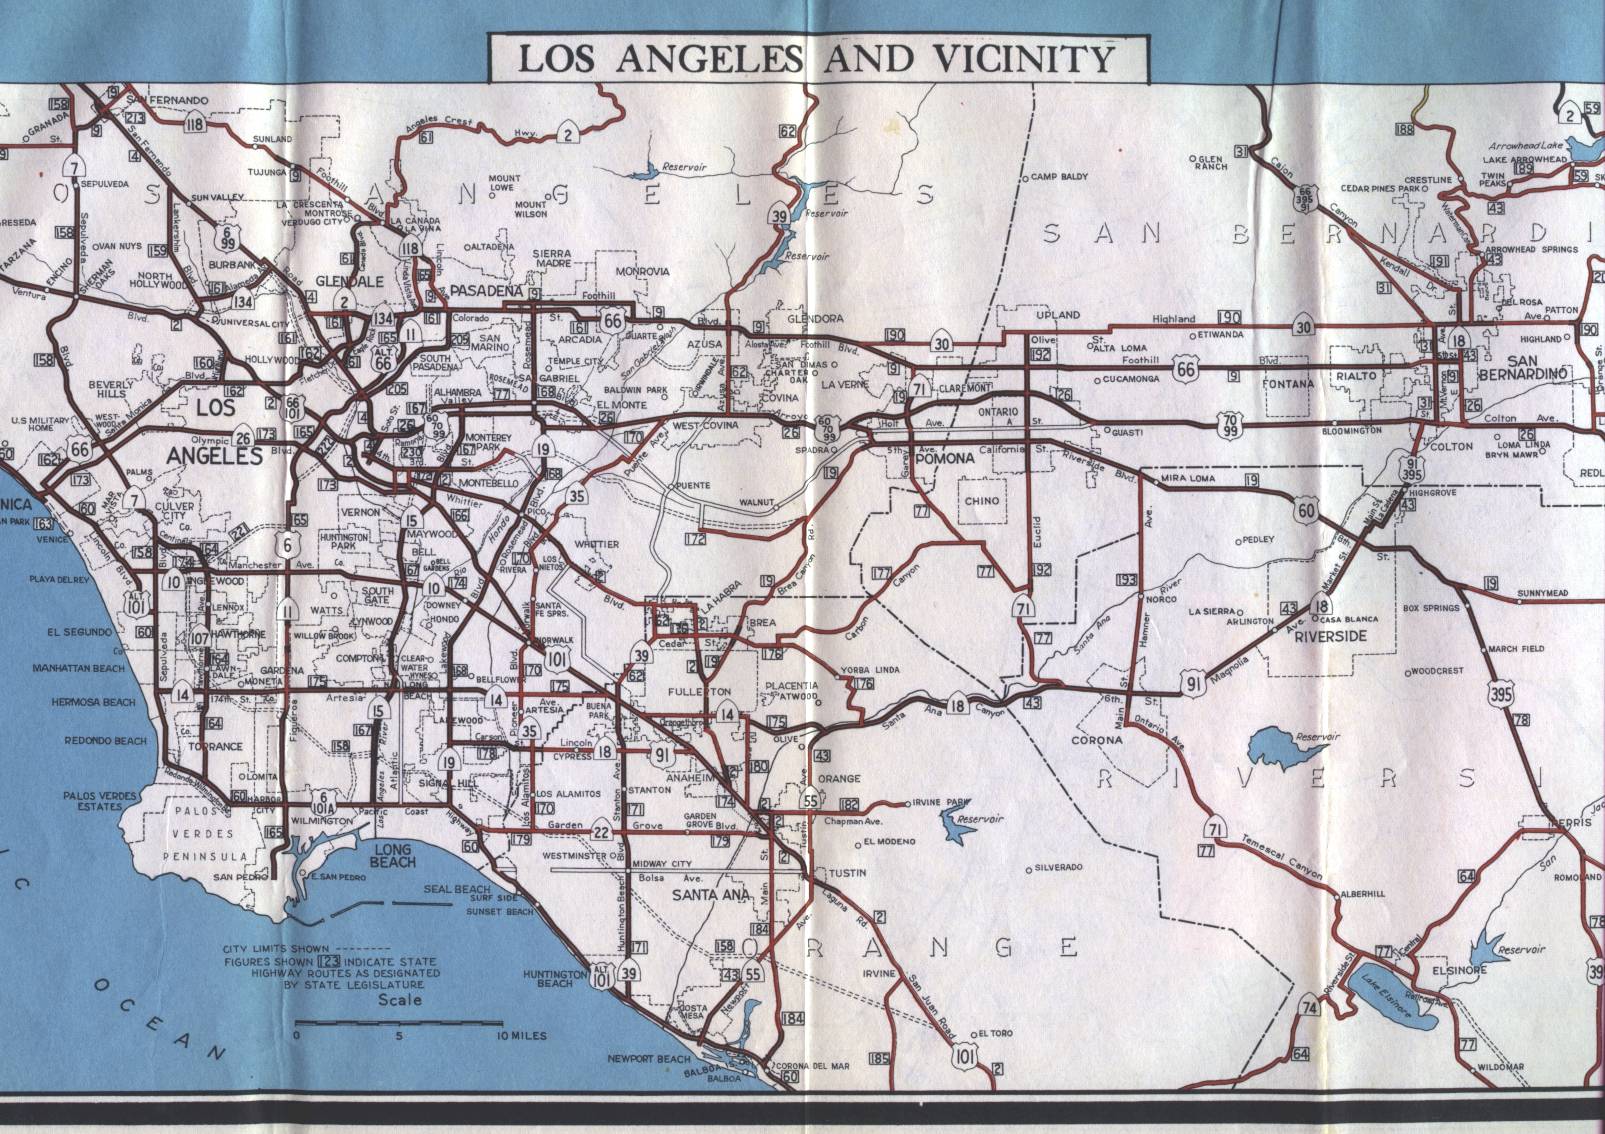 Official inset map for Los Angeles (1956)